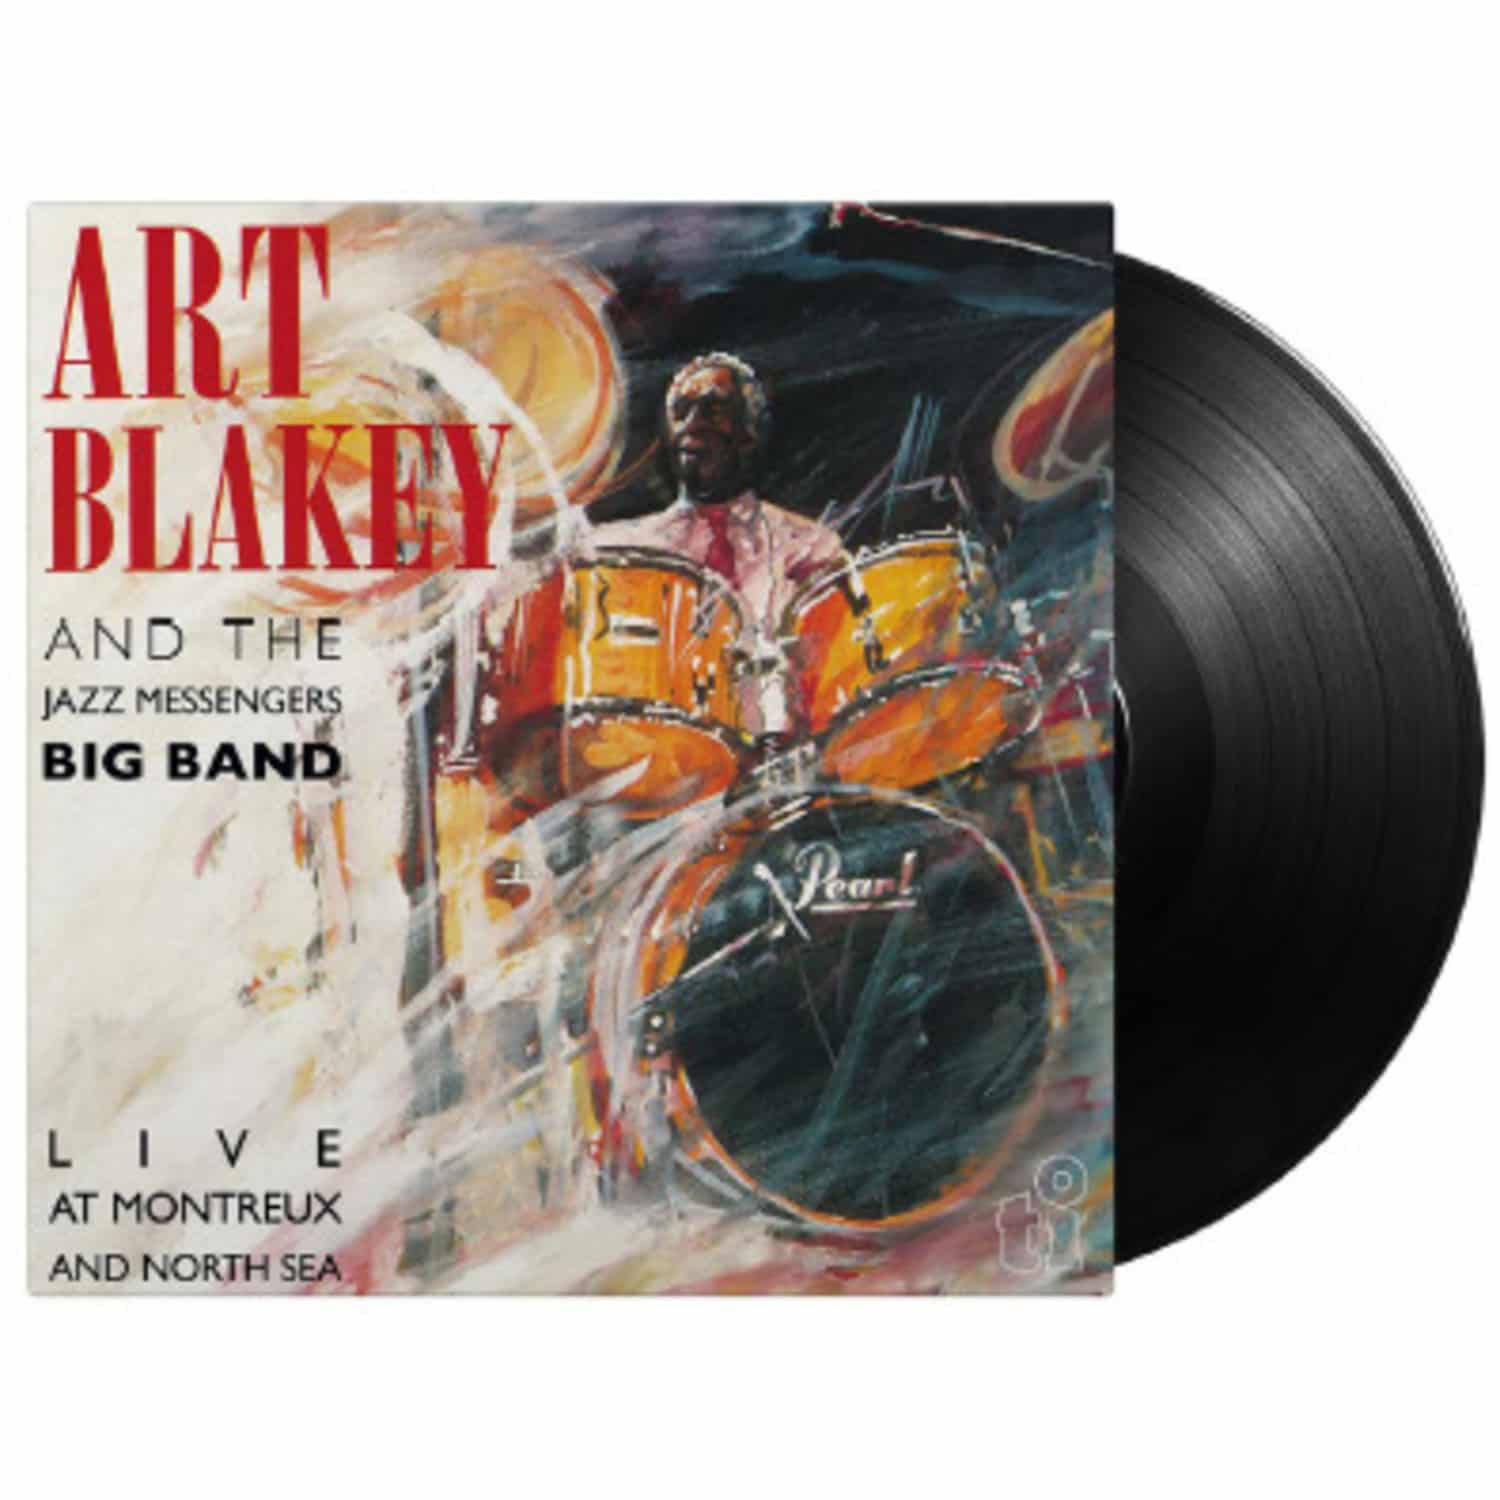 Art Blakey and the Jazz Messengers Big Band - LIVE AT MONTREUX AND NORTH SEA 